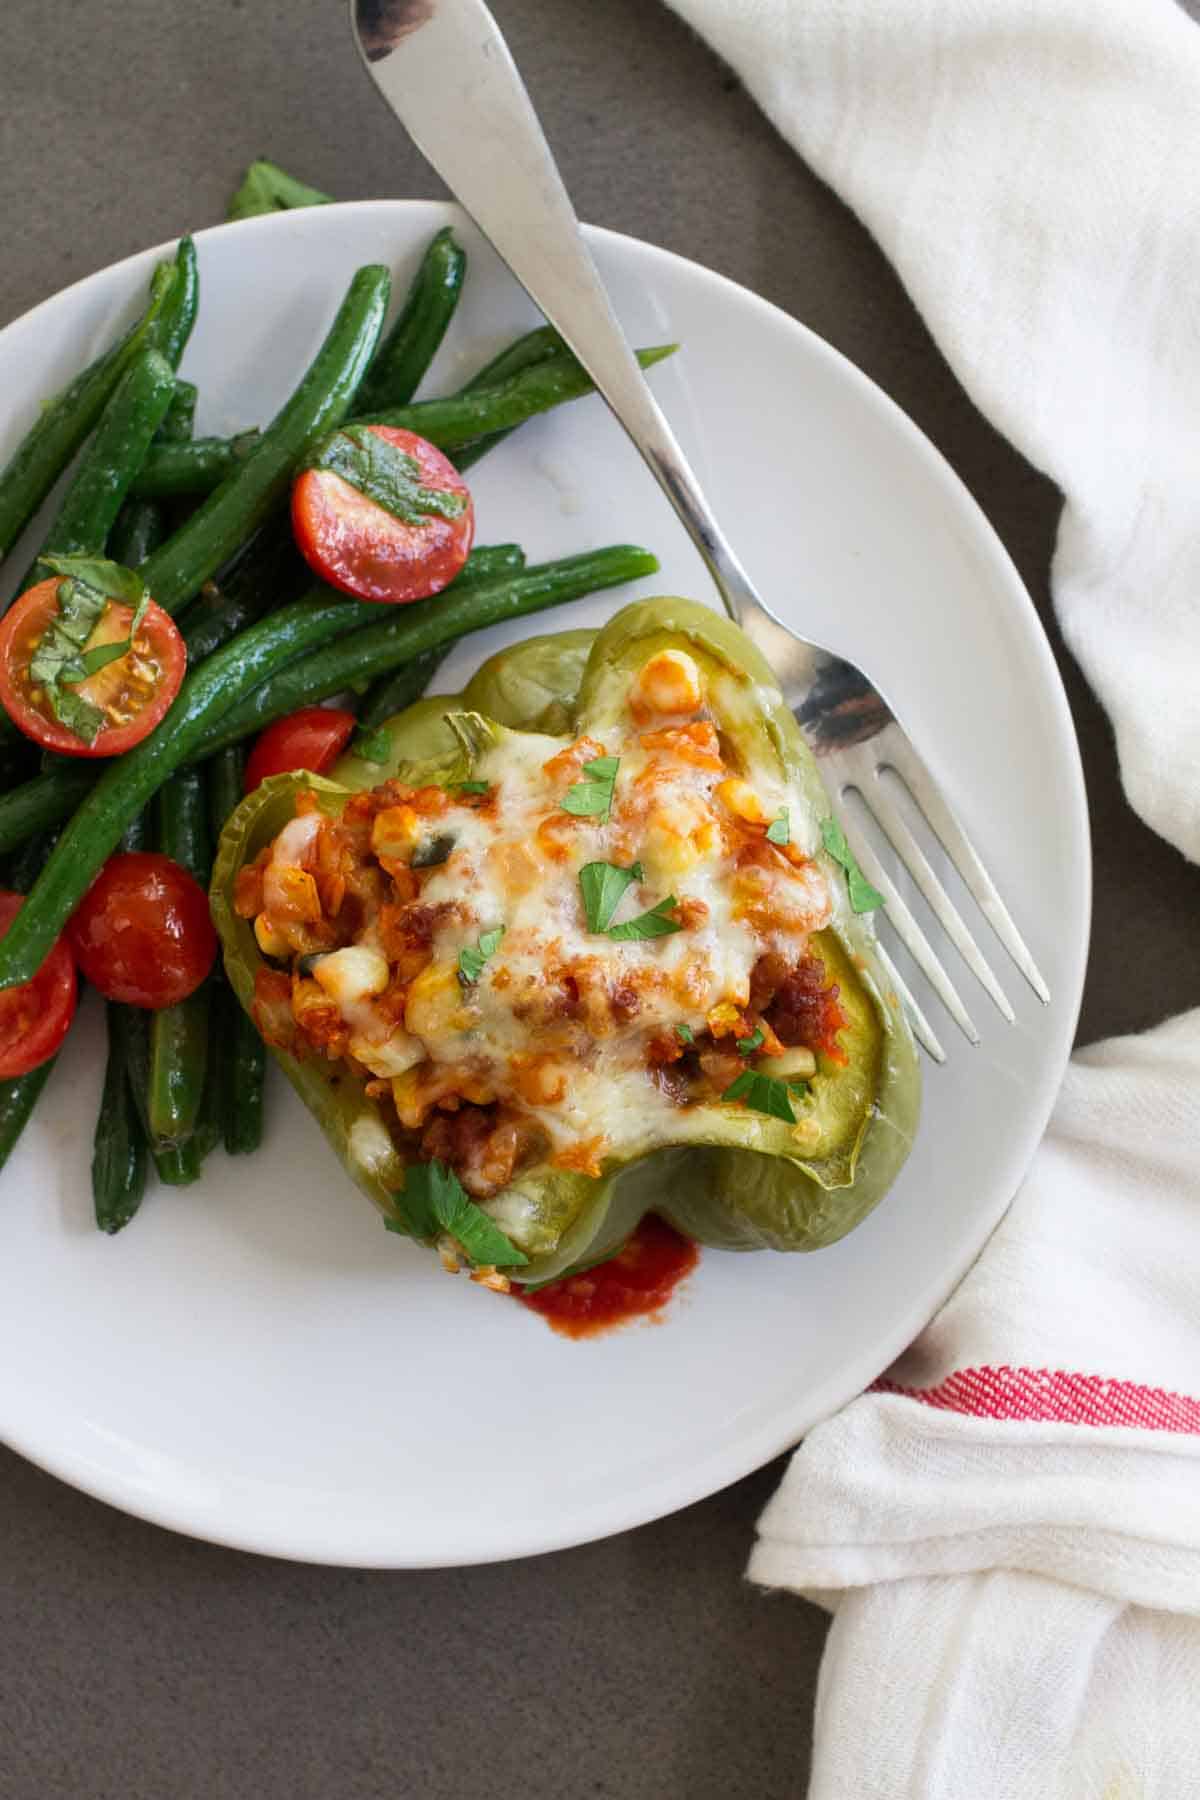 Plate with Vegetable and Sausage Stuffed Pepper with a side of green beans